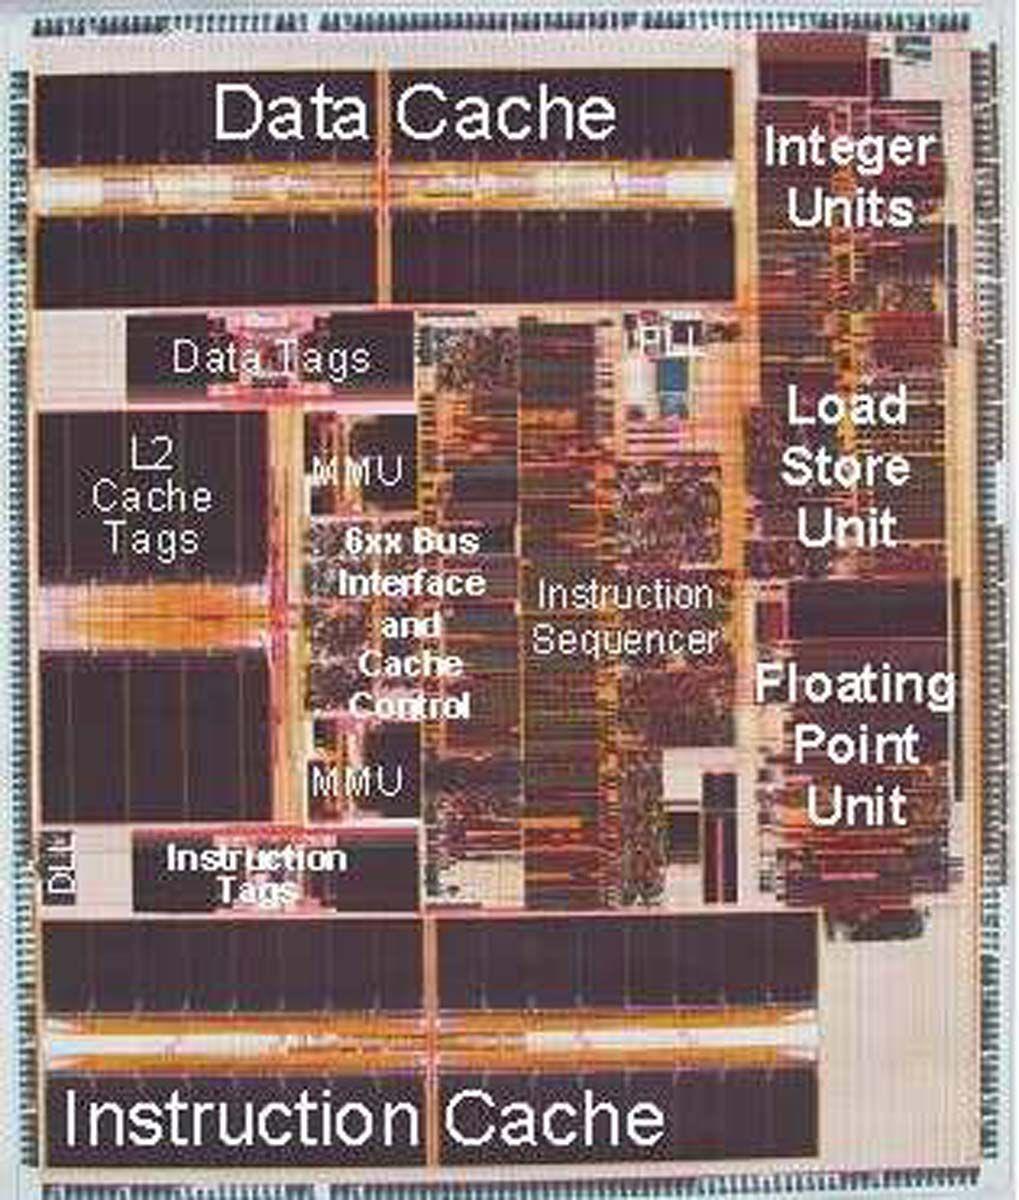 An actual CPU -- Early PowerPC Cache 32 KiByte Instructions and 32 KiByte Data L1 caches External L2 Cache interface with integrated controller and cache tags, supports up to 1 MiByte external L2